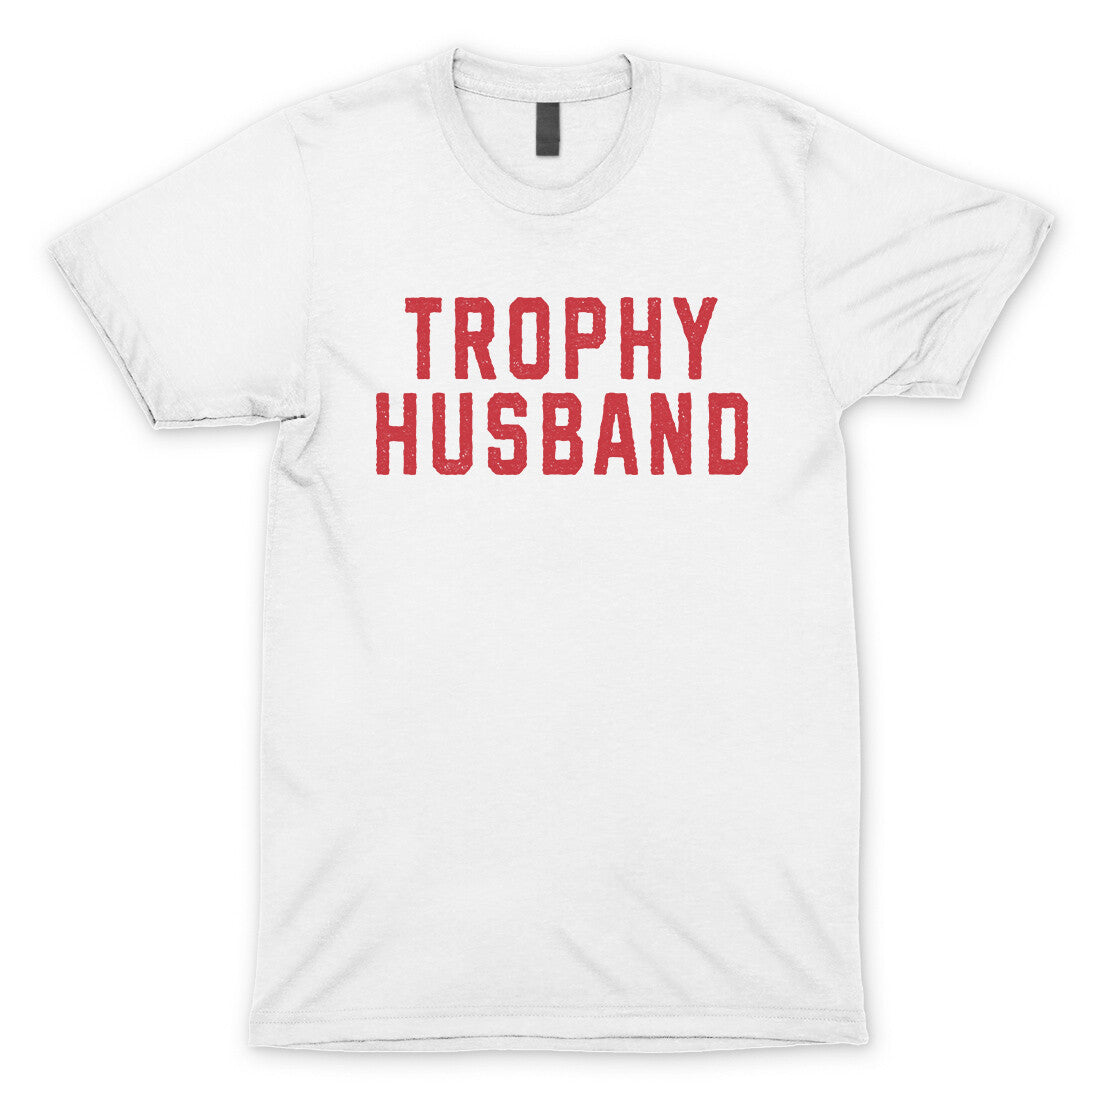 Trophy Husband in White Color